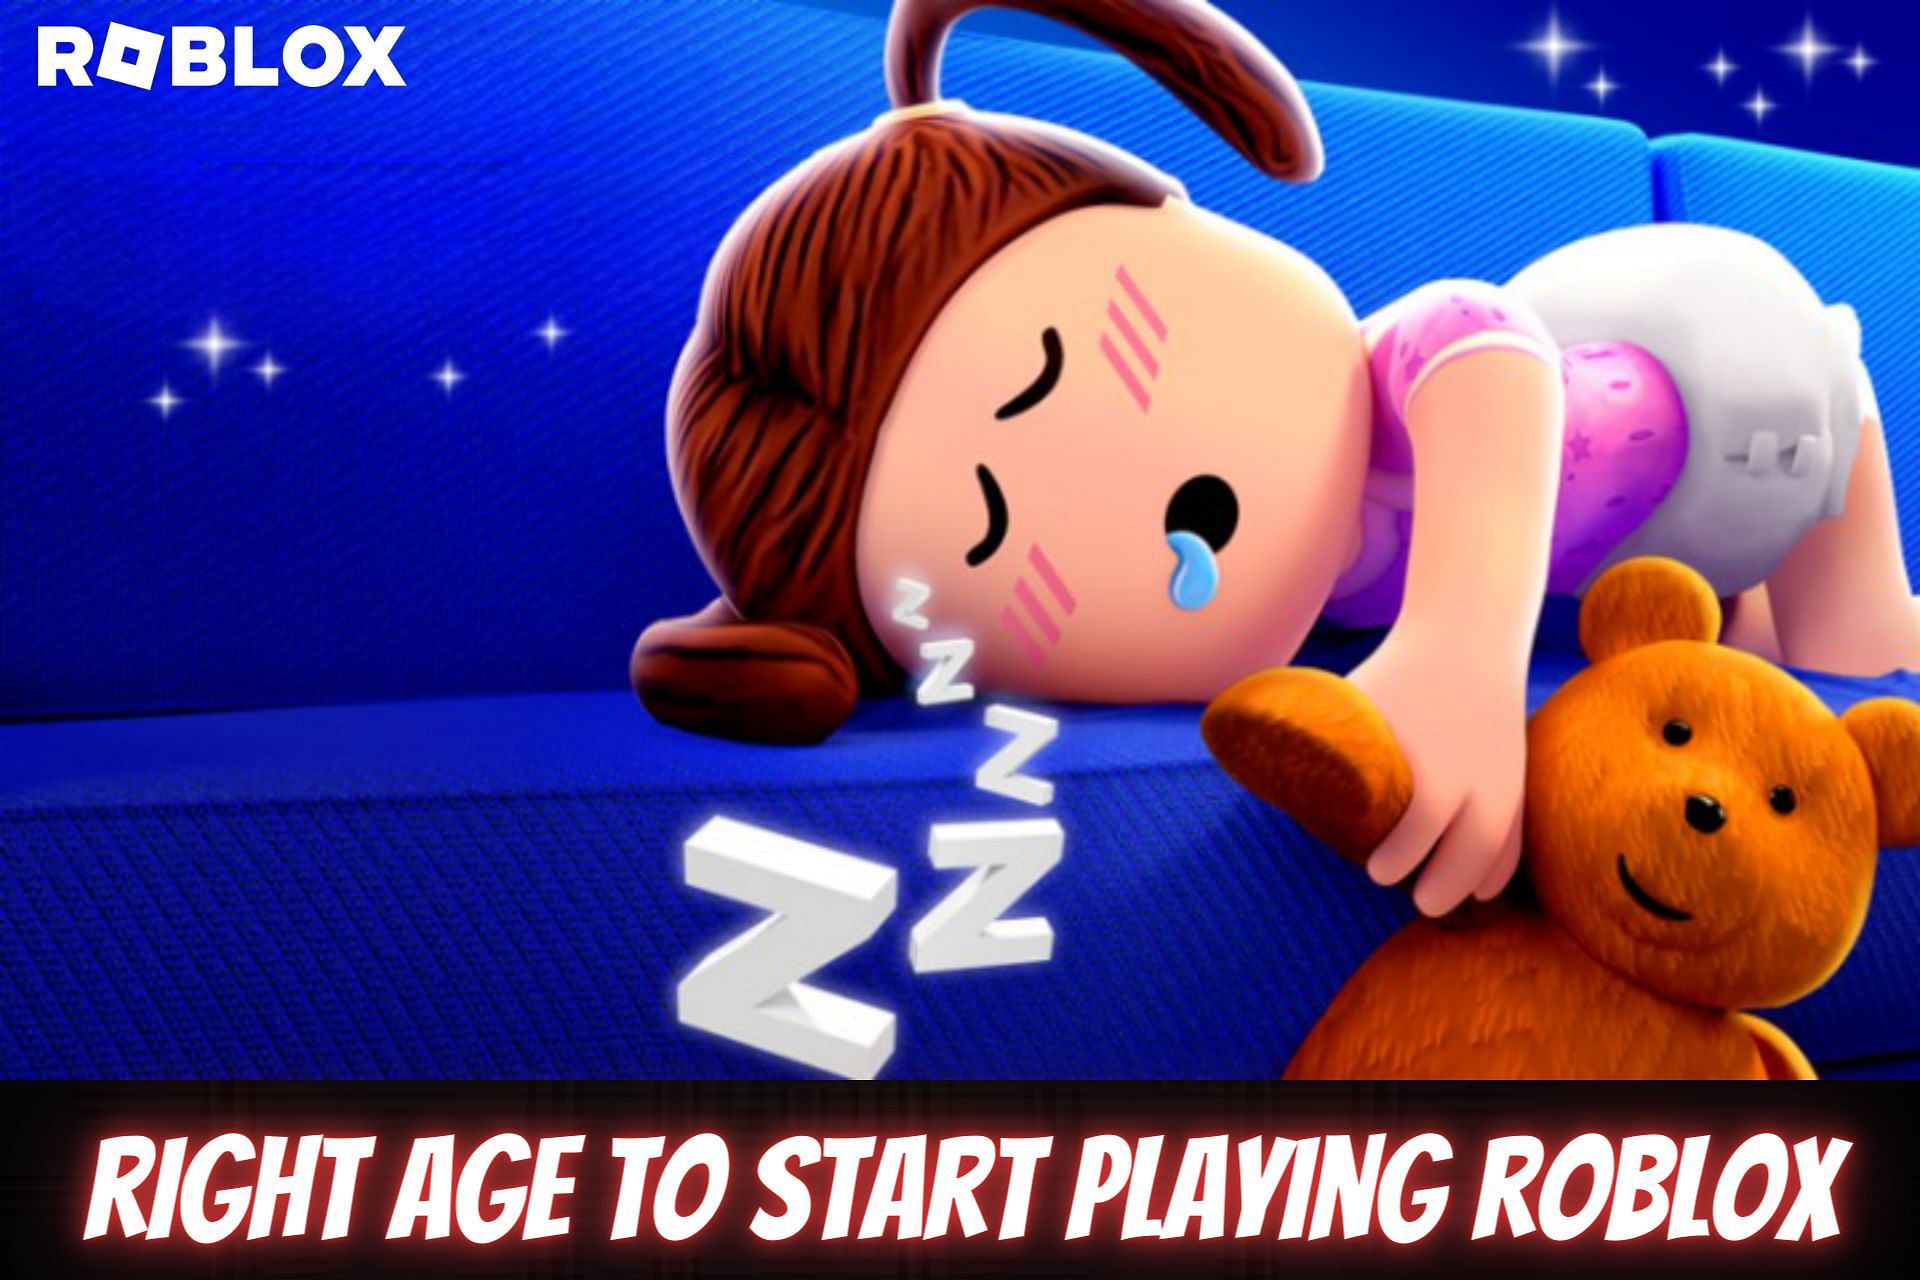 Kids love Roblox. Can a 30-year-old love it, too?